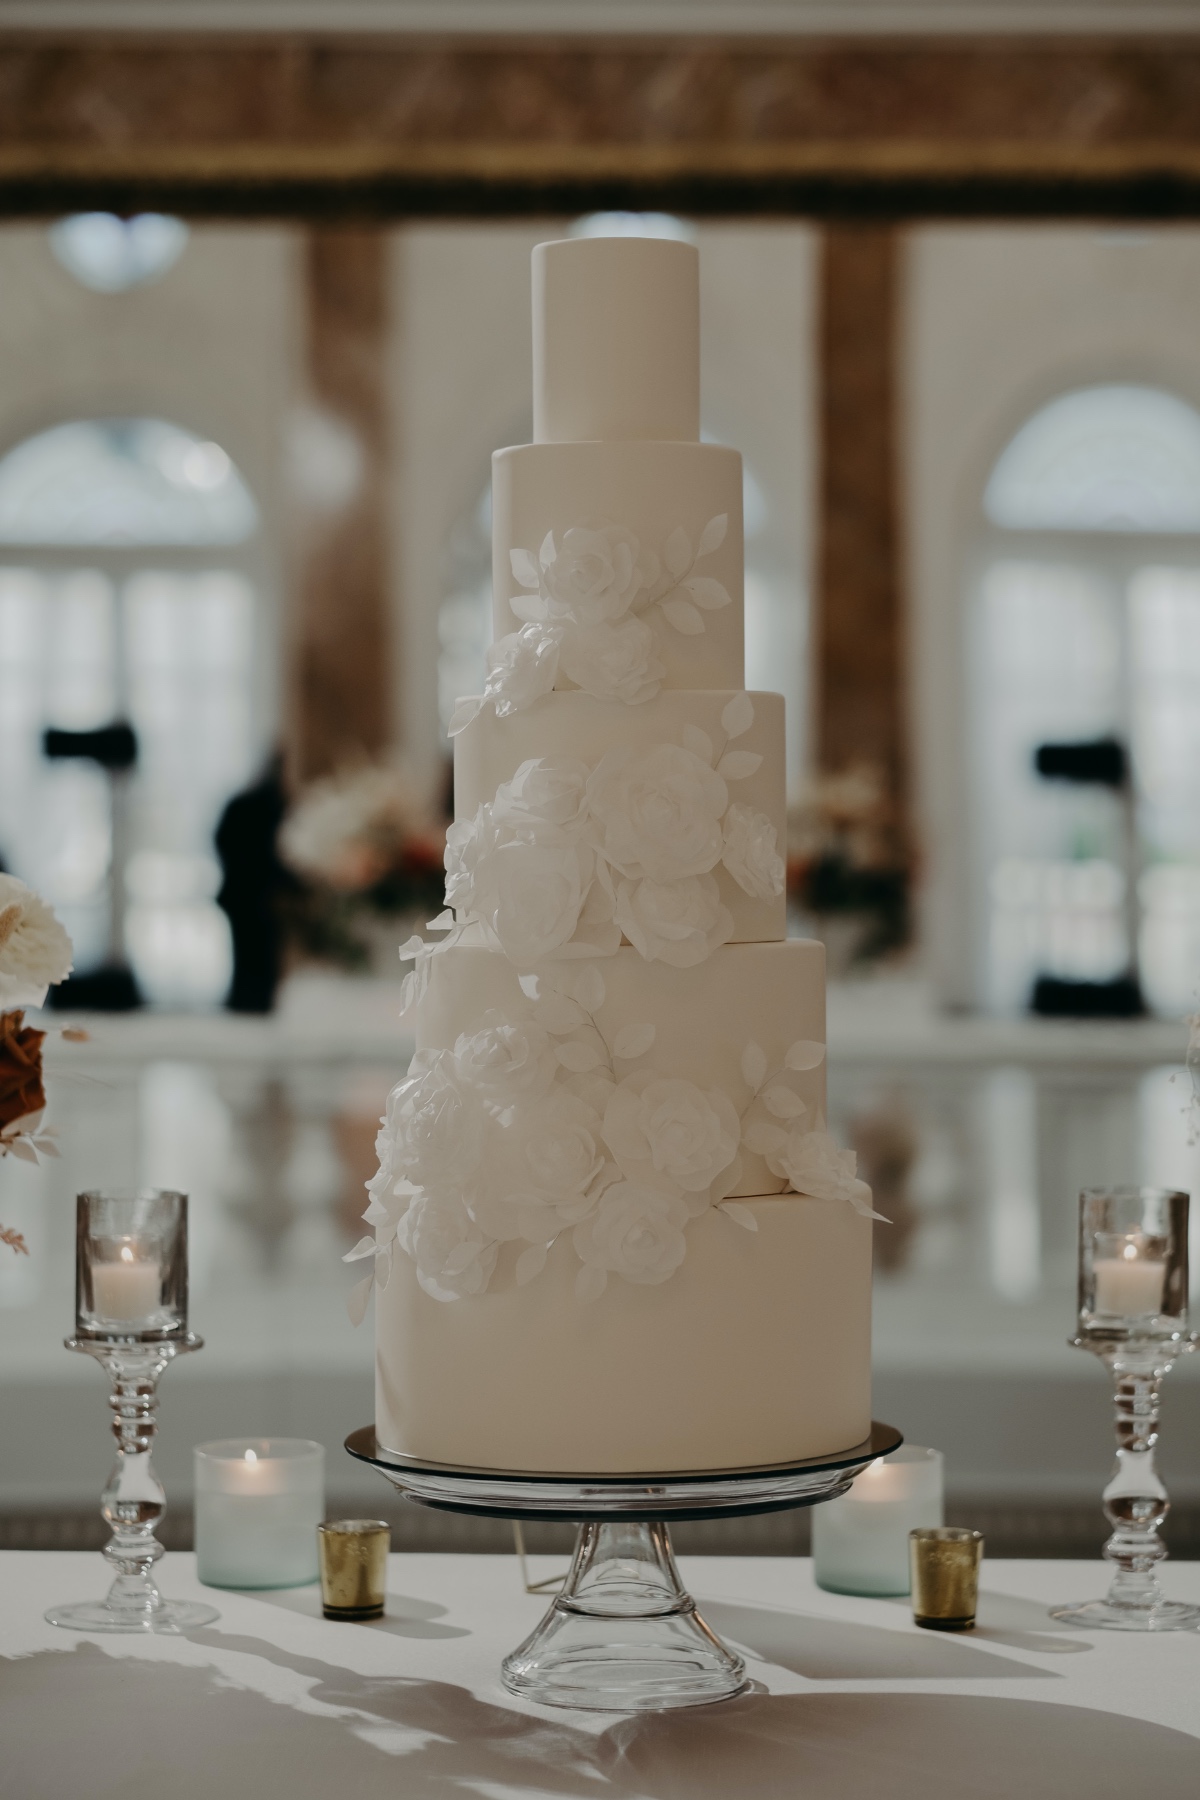 Close-up of wedding cake with white floral design